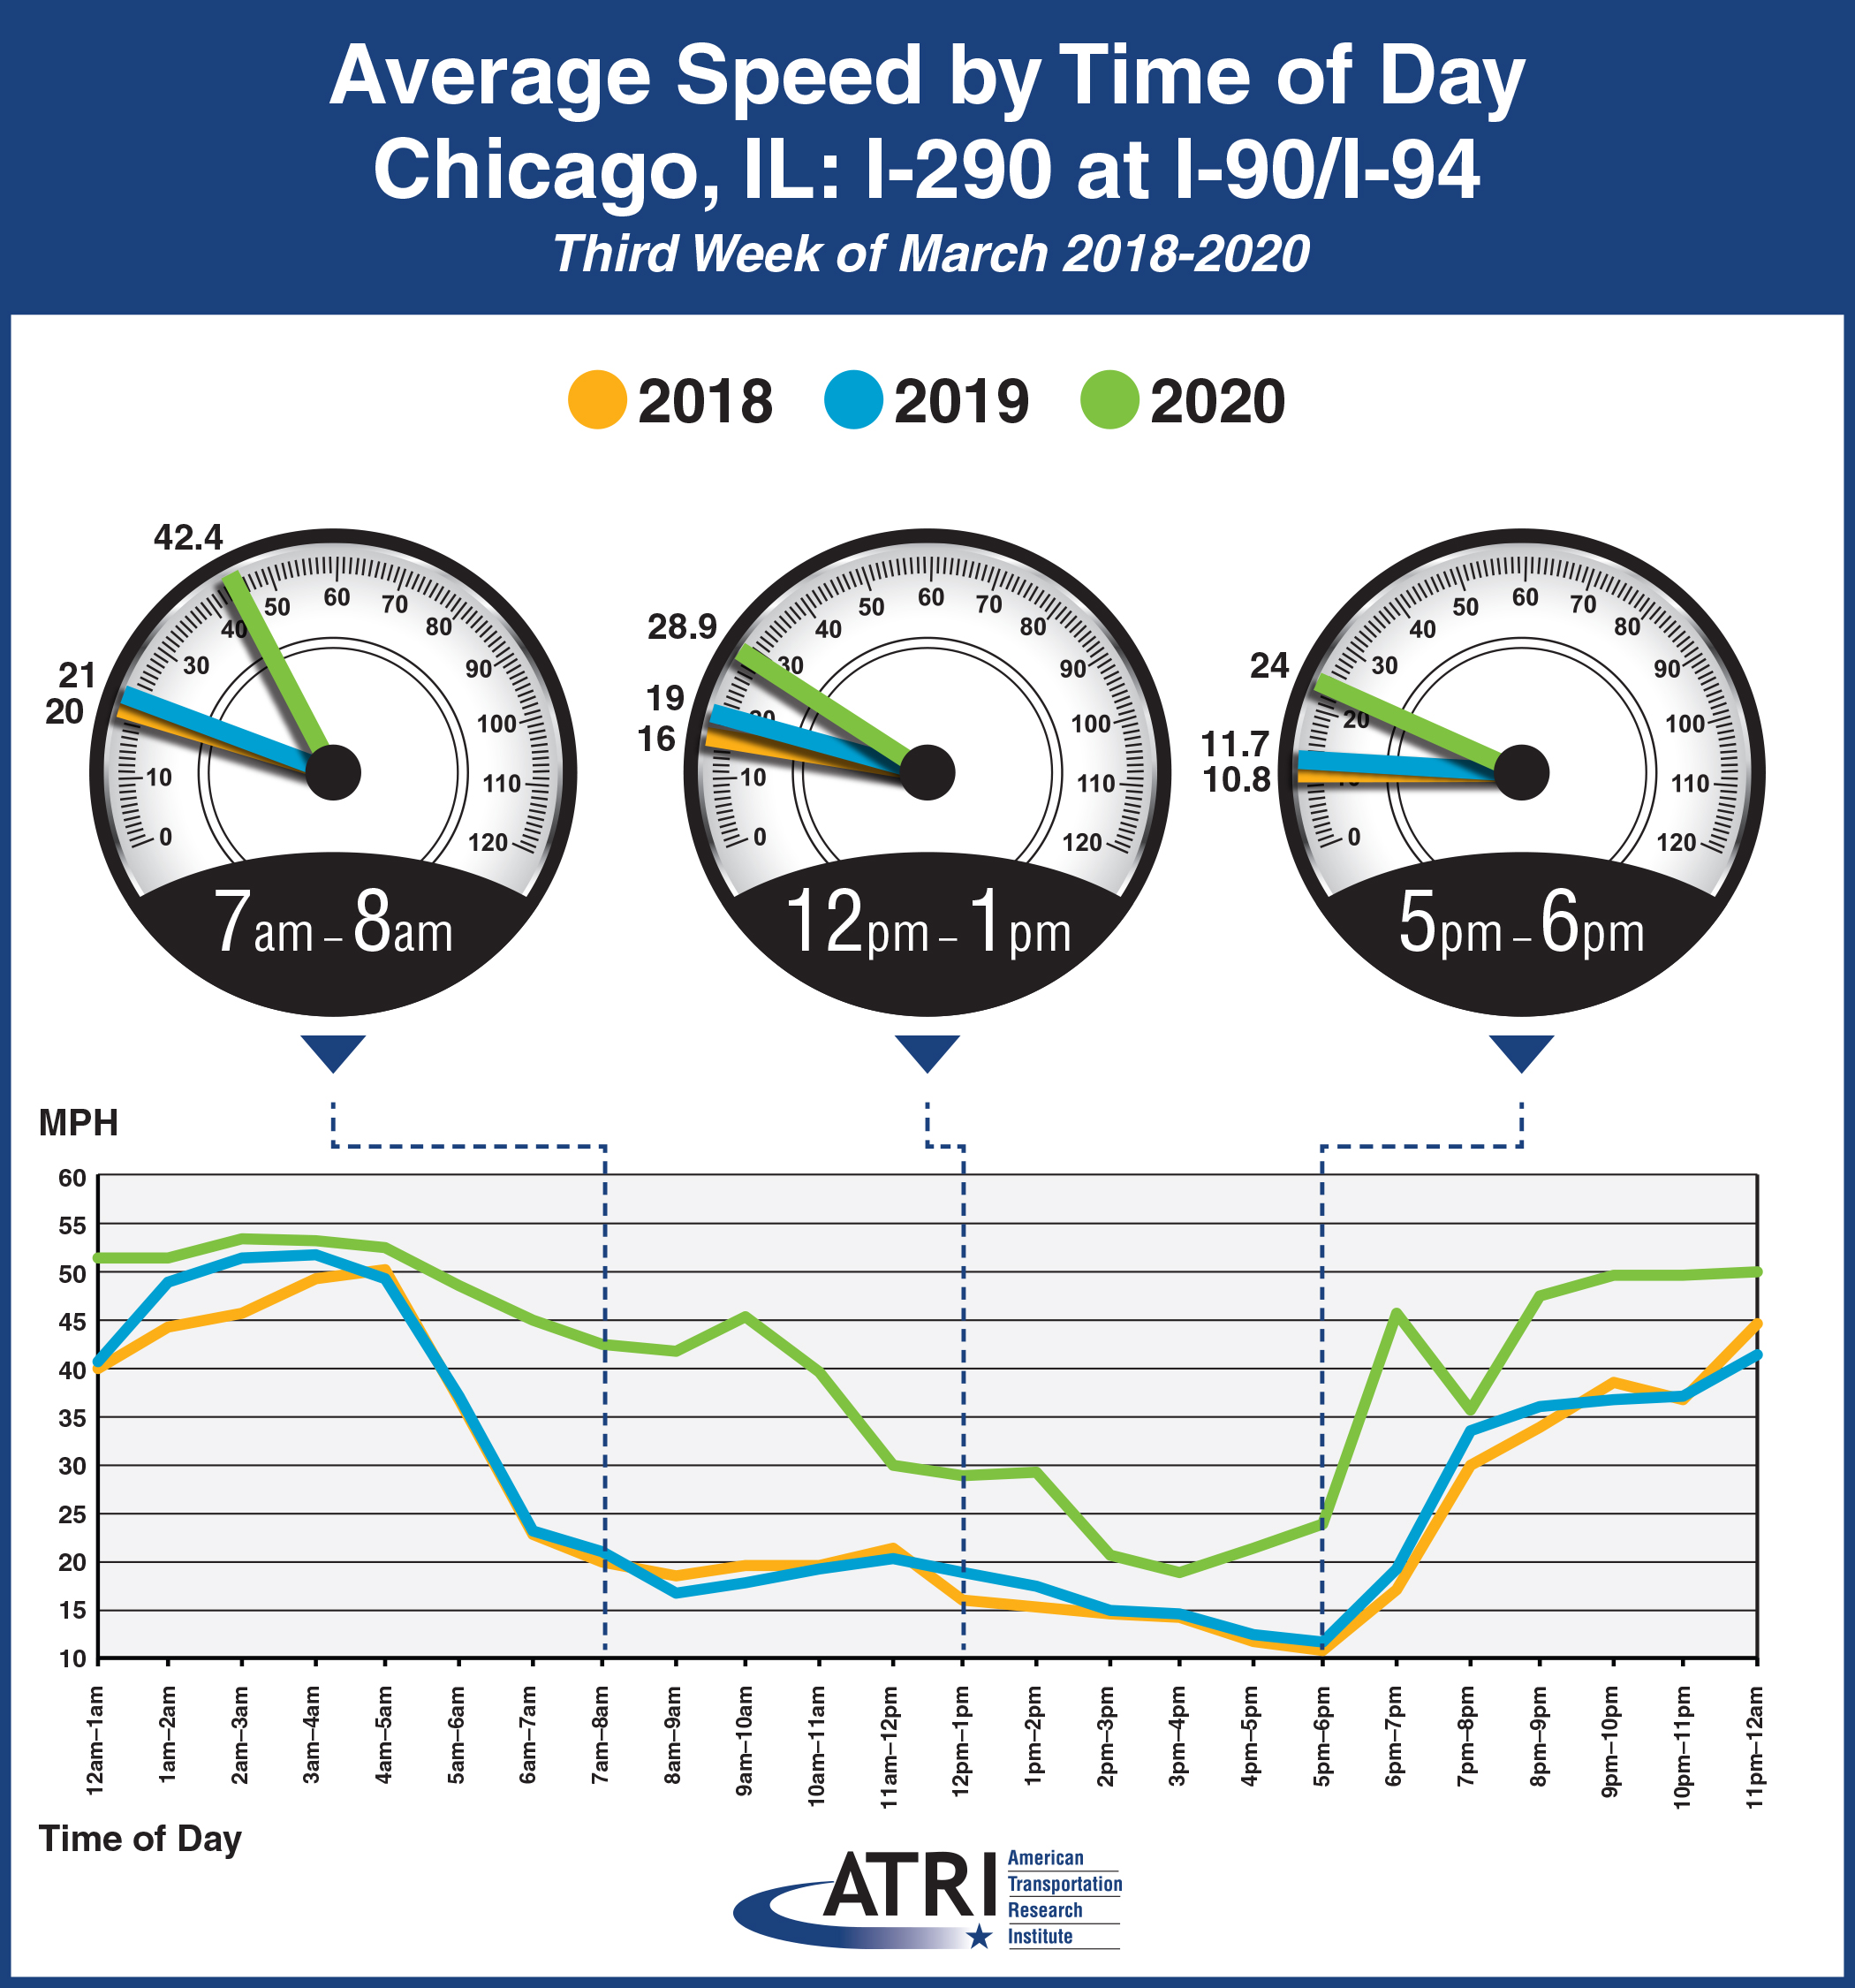 Avg. Speed by Time of Day - Chicago, IL: I-290 at I-90/I-94